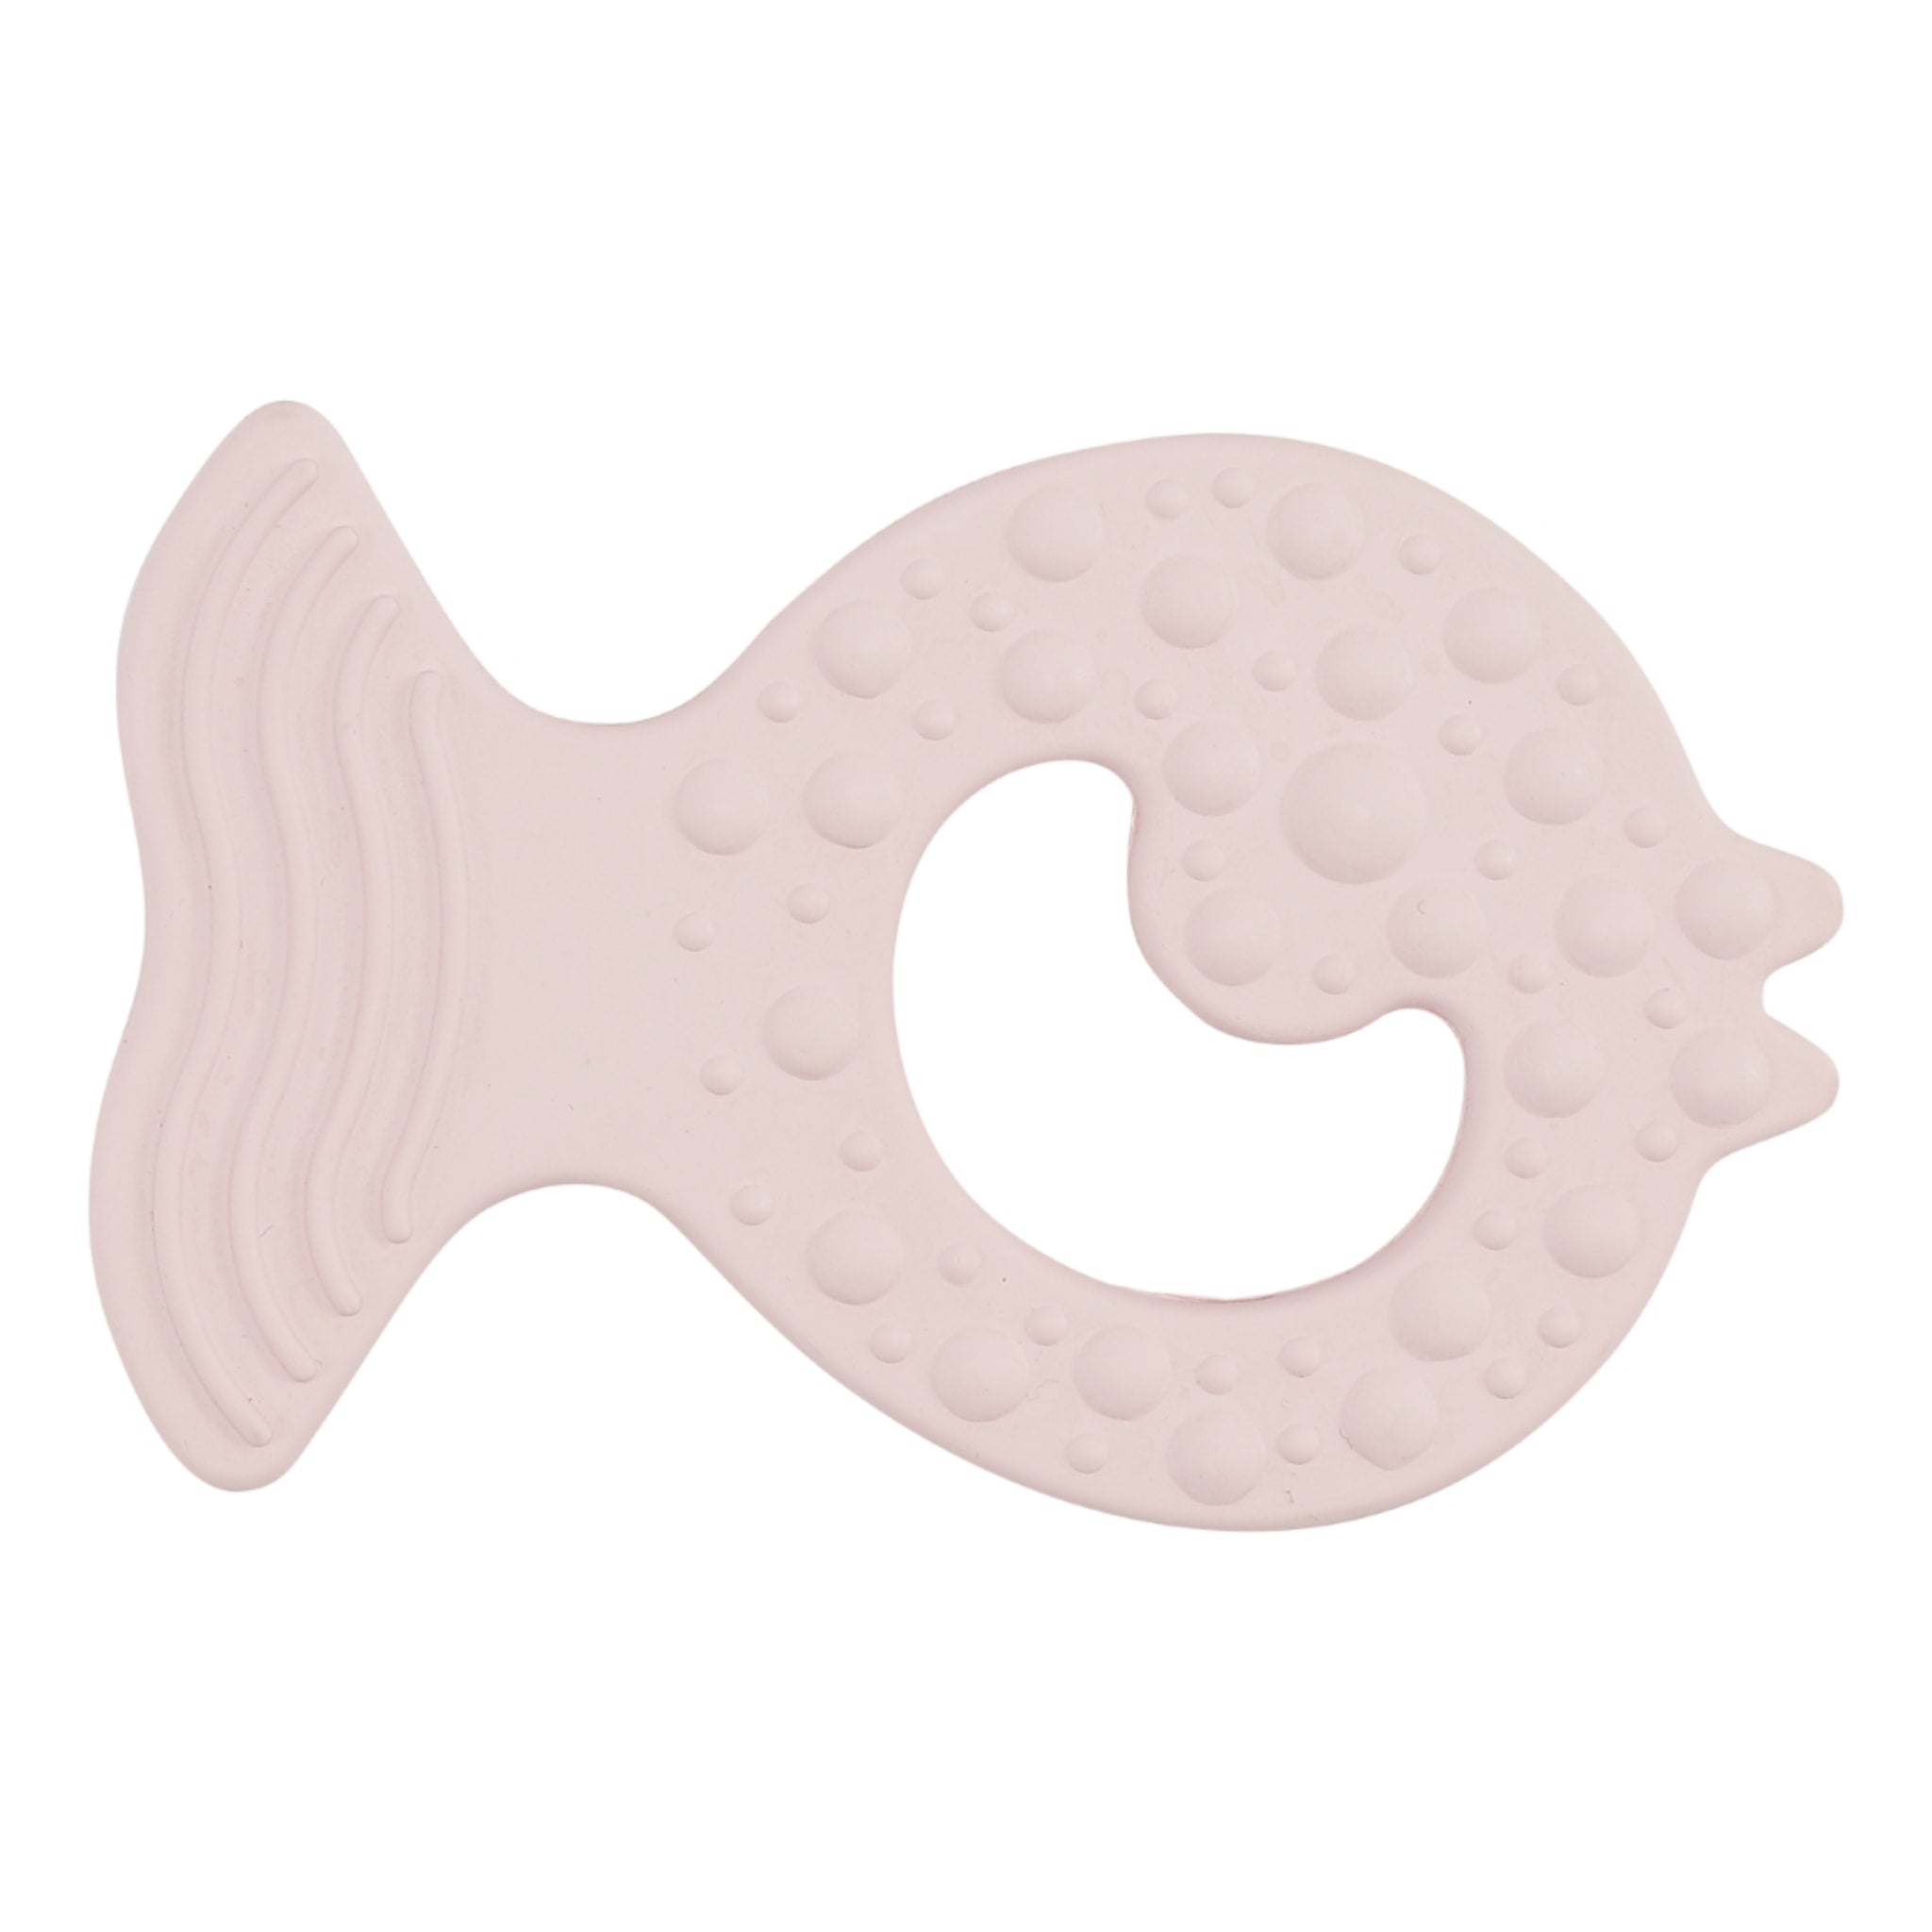 Fish Teether in Natural Rubber